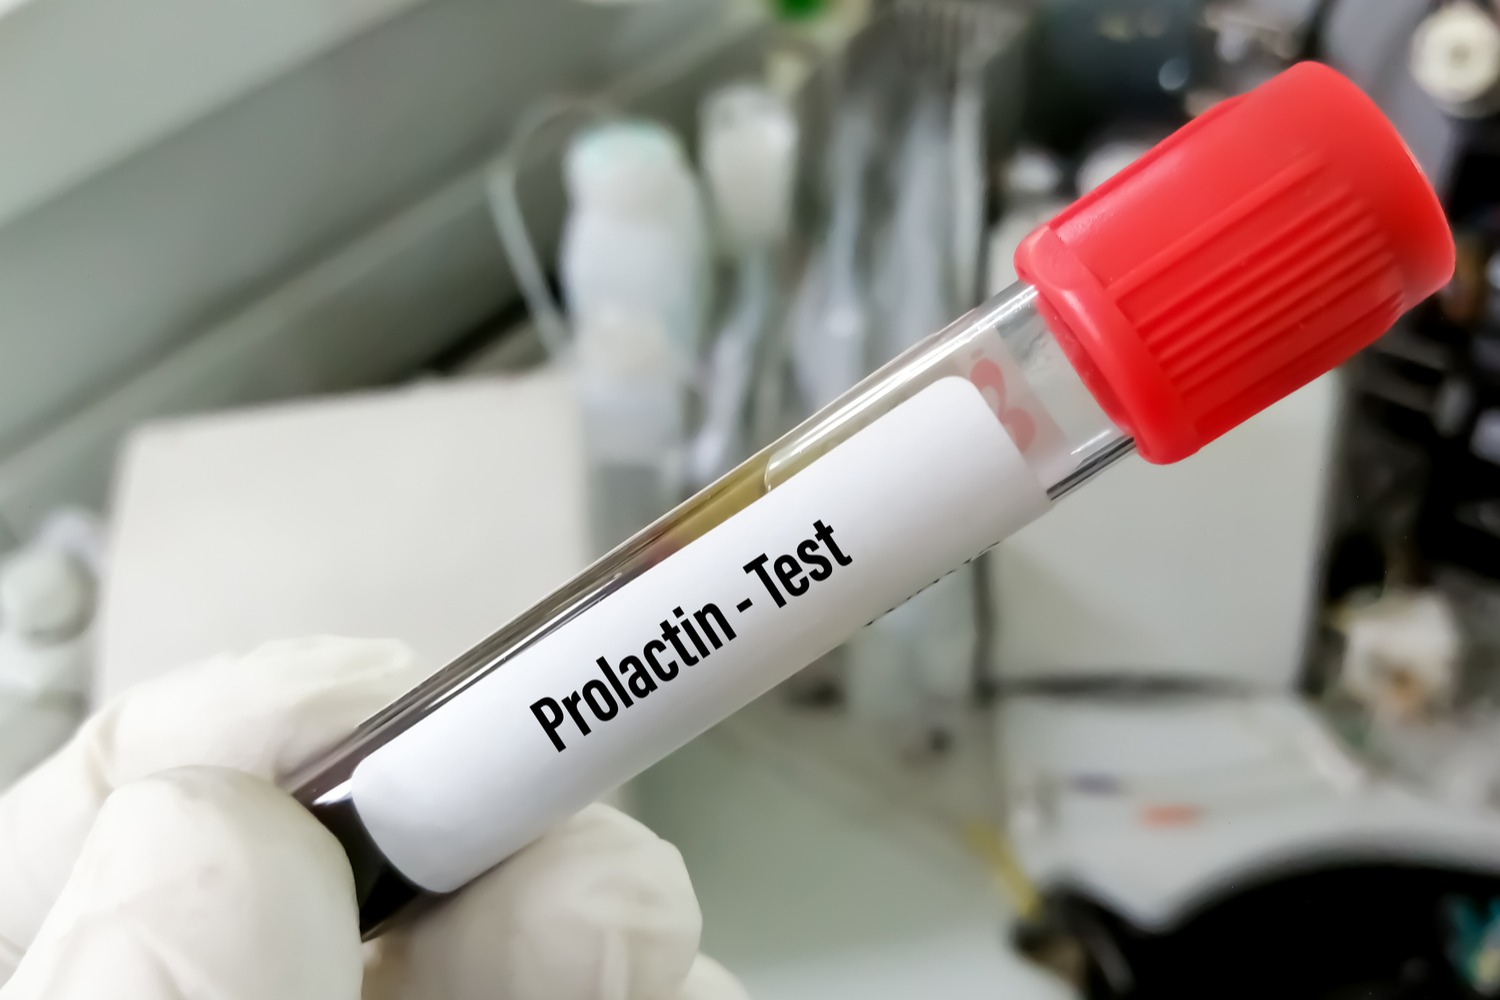 Prolactin Levels Test For Pregnancy – Causes, Symptoms, And Treatment